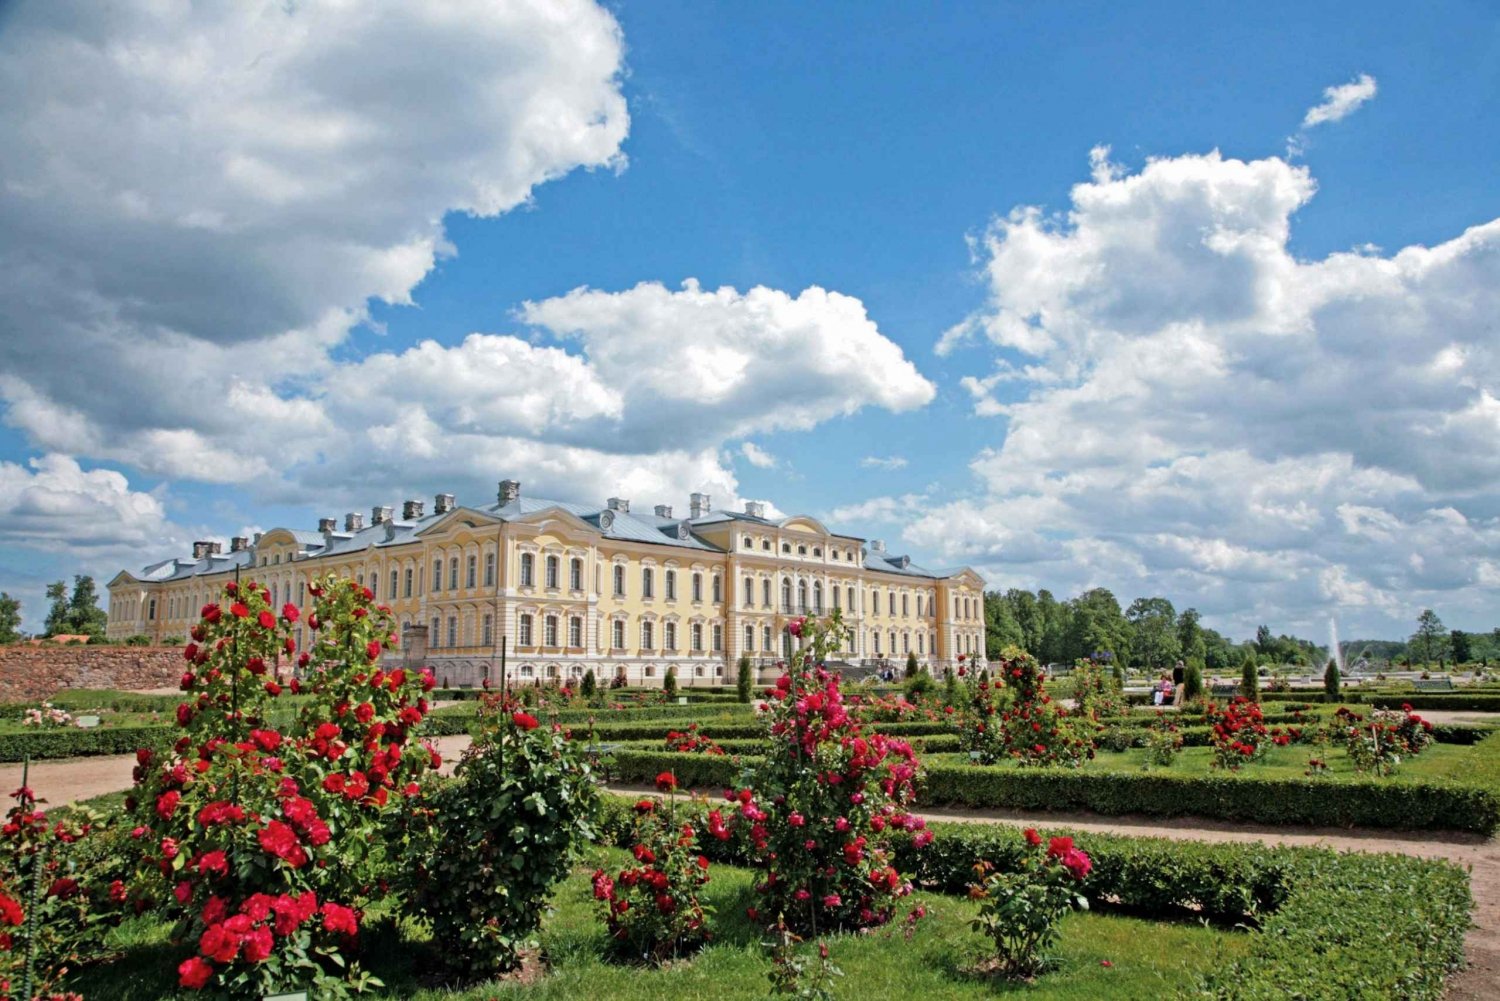 Experience-the-Magical-Rundale-Palace